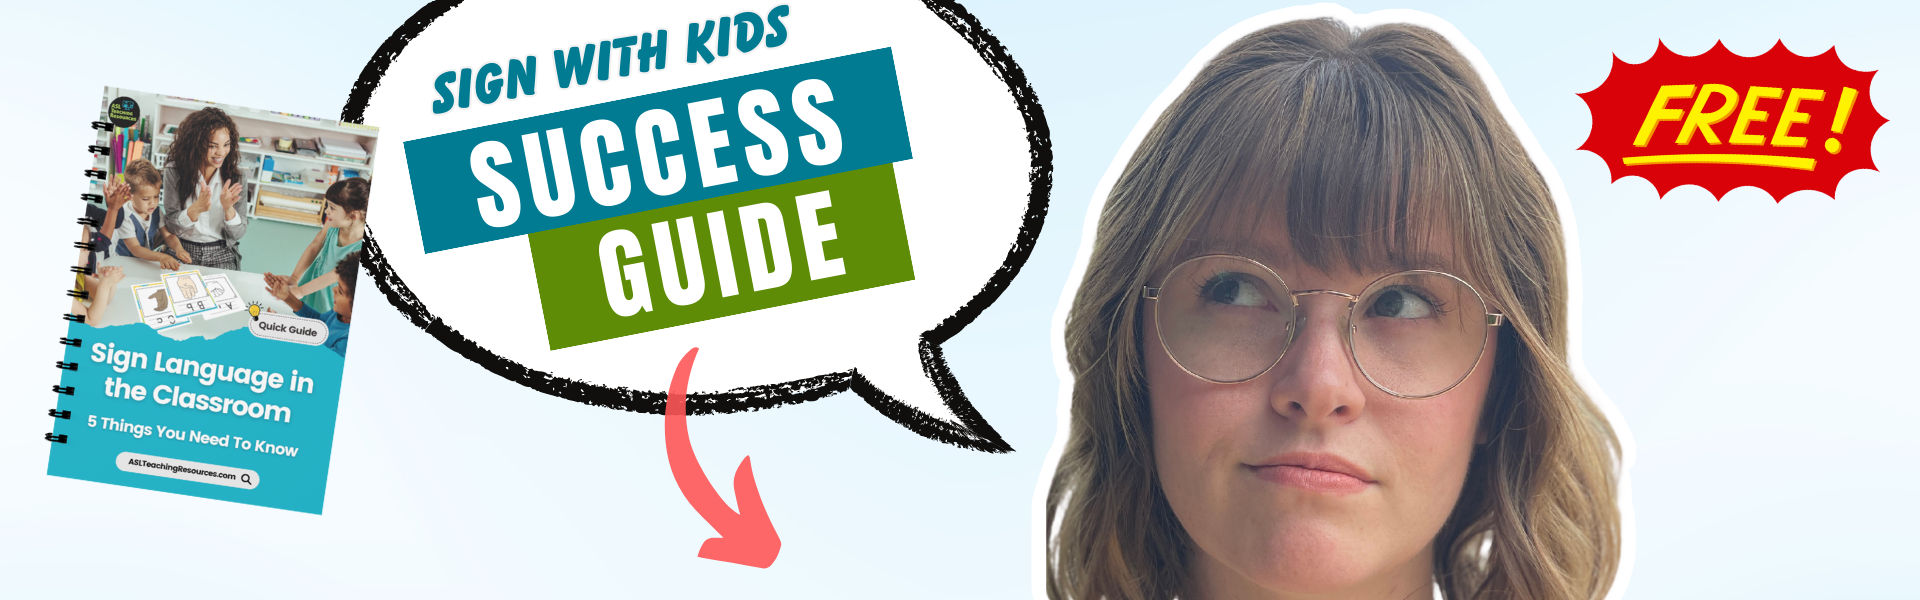 Sign Language in the Classroom - Sign with Kids Success Guide